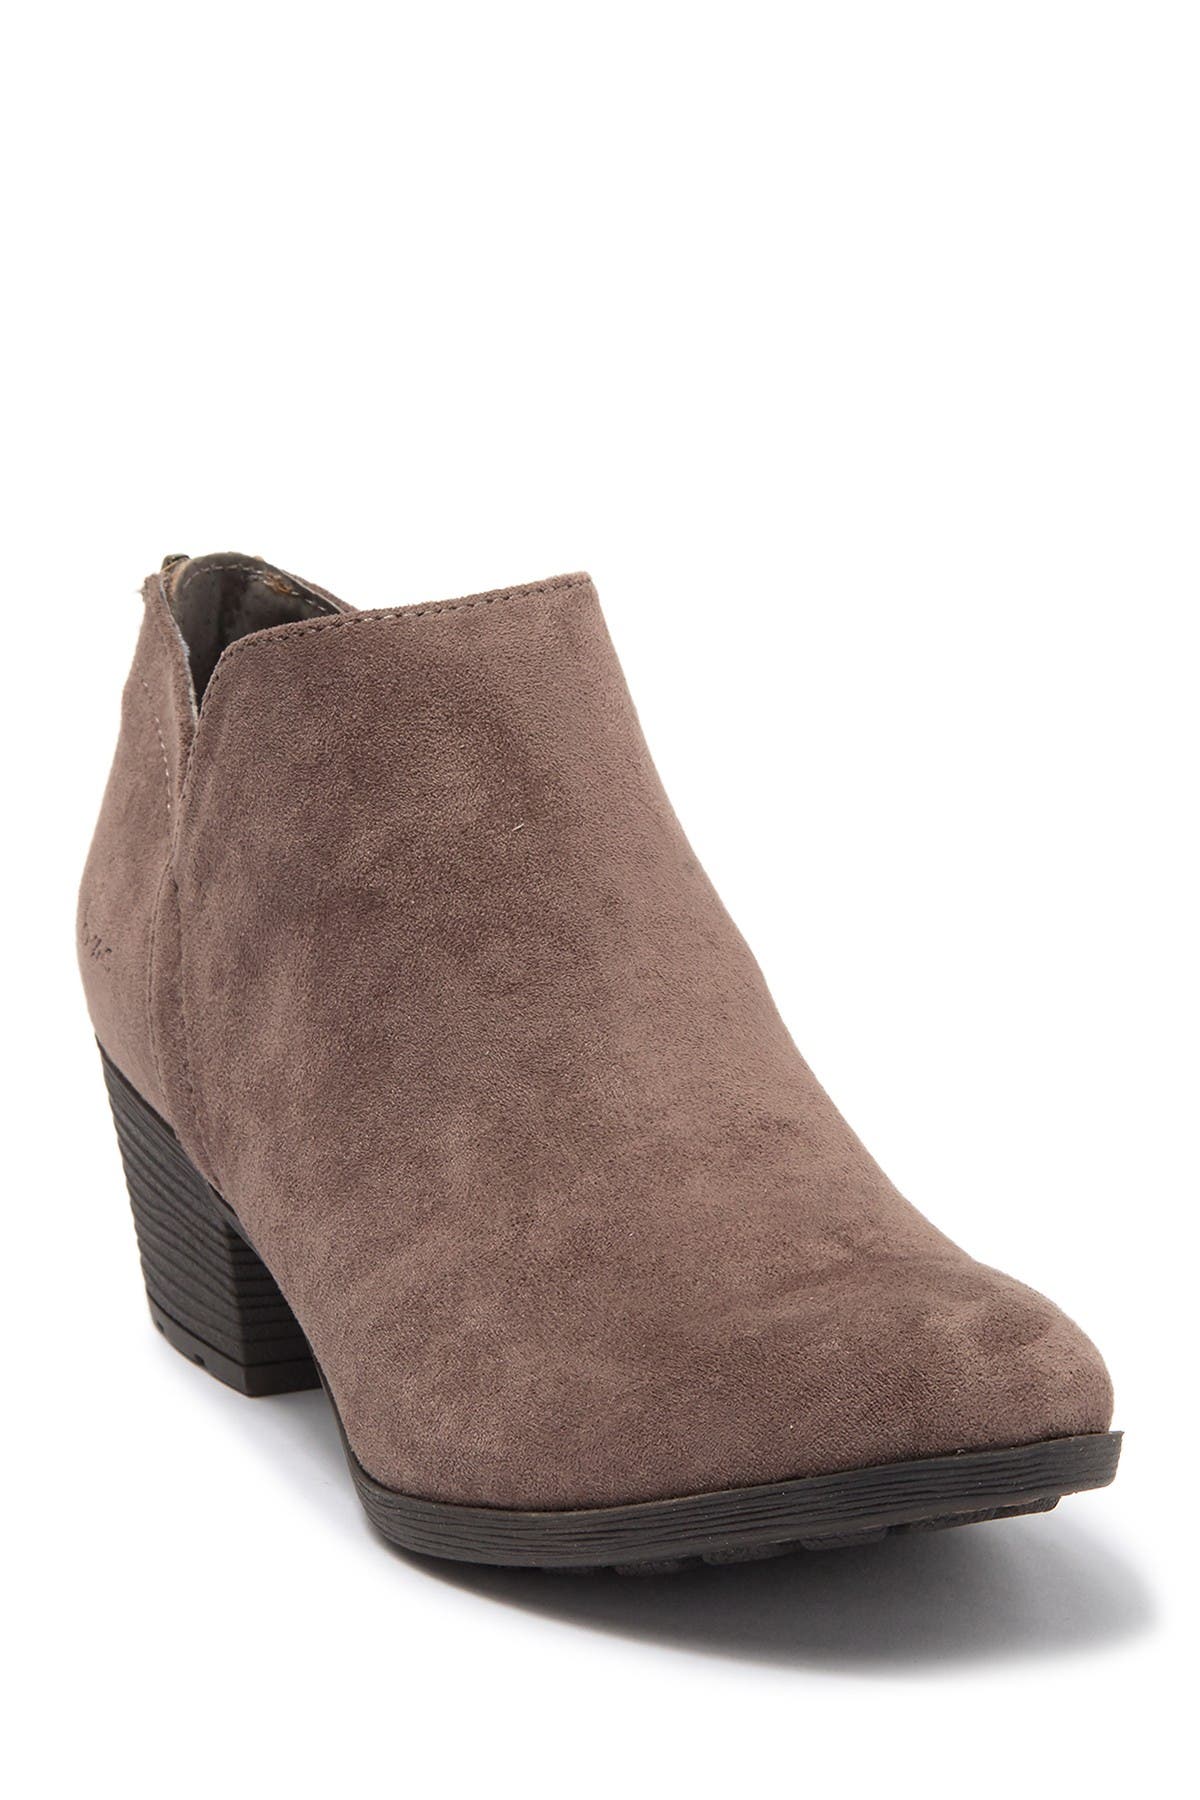 B.O.C. BY BORN | Celosia Ankle Bootie 